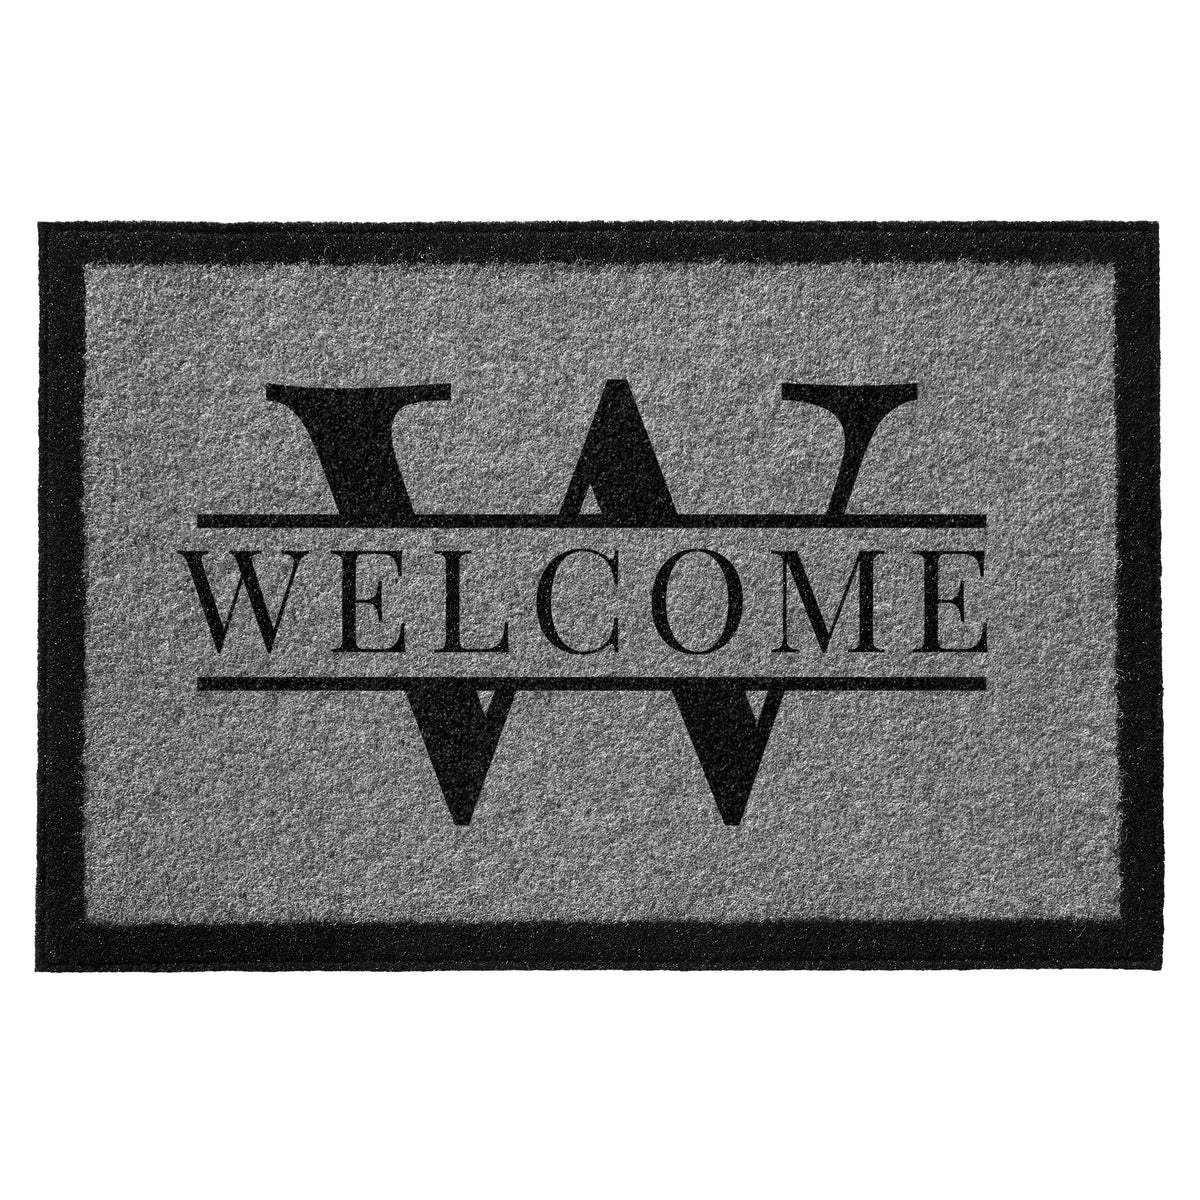 Infinity Custom Mats™ All-Weather Personalized Door Mat - STYLE: WILLIAMS COLOR: GREY / BLACK - rugsthatfit.com